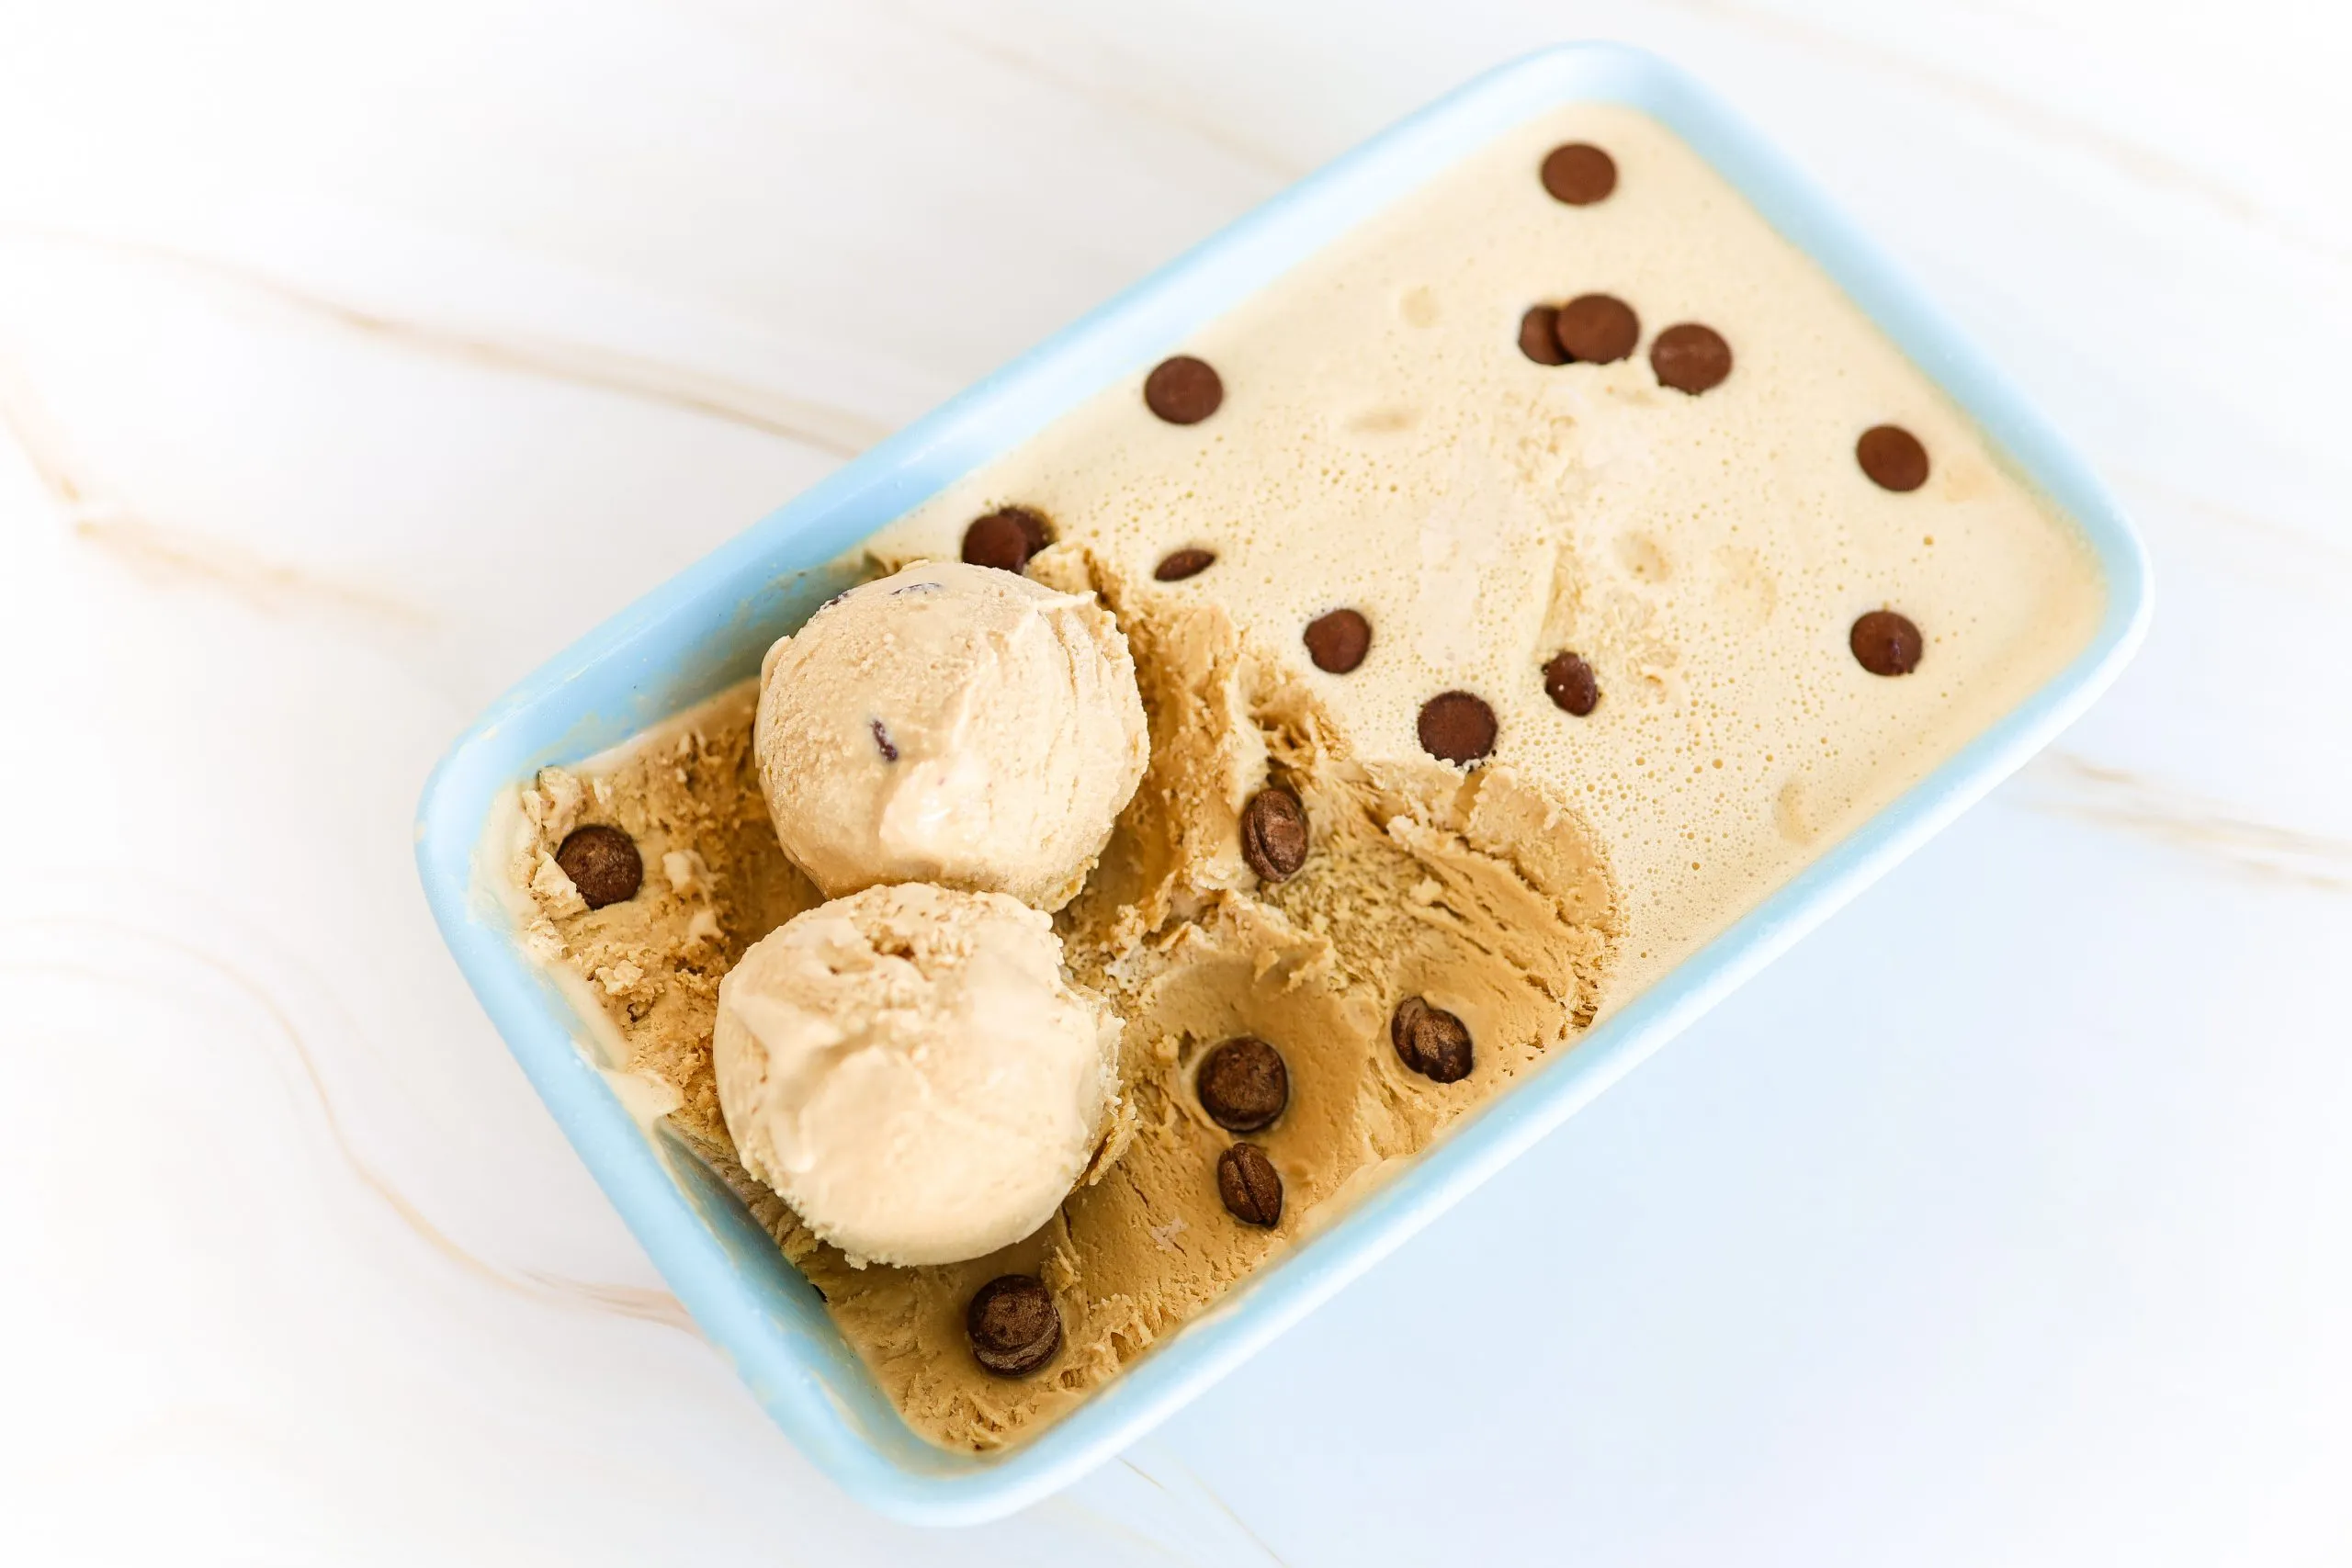 How To Make Coffee Ice Cream Without An Ice Cream Maker And Heavy Whipping Cream